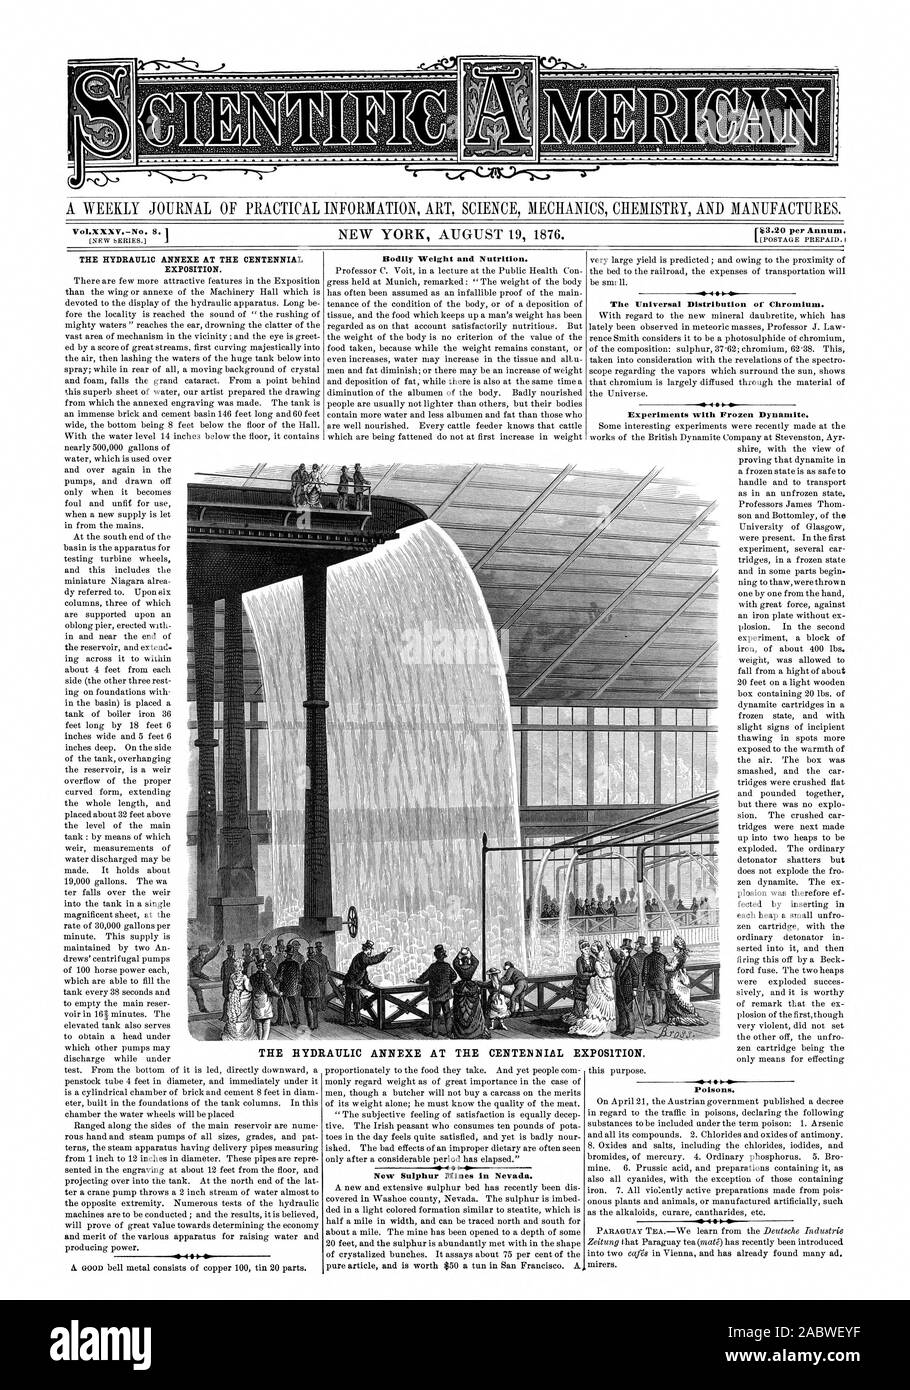 It Vol.XXXV.-No. 8.1 THE HYDRAULIC ANNEXE AT THE CENTENNIAL EXPOSITION. Bodily Weight and Nutrition. The Universal Distribution of Chromium. Experiments with Frozen Dynamite. Poisons. CENTENNIAL EXPOSITION. THE HYDRAULIC ANNEXE AT THE, scientific american, 1876-08-19 Stock Photo